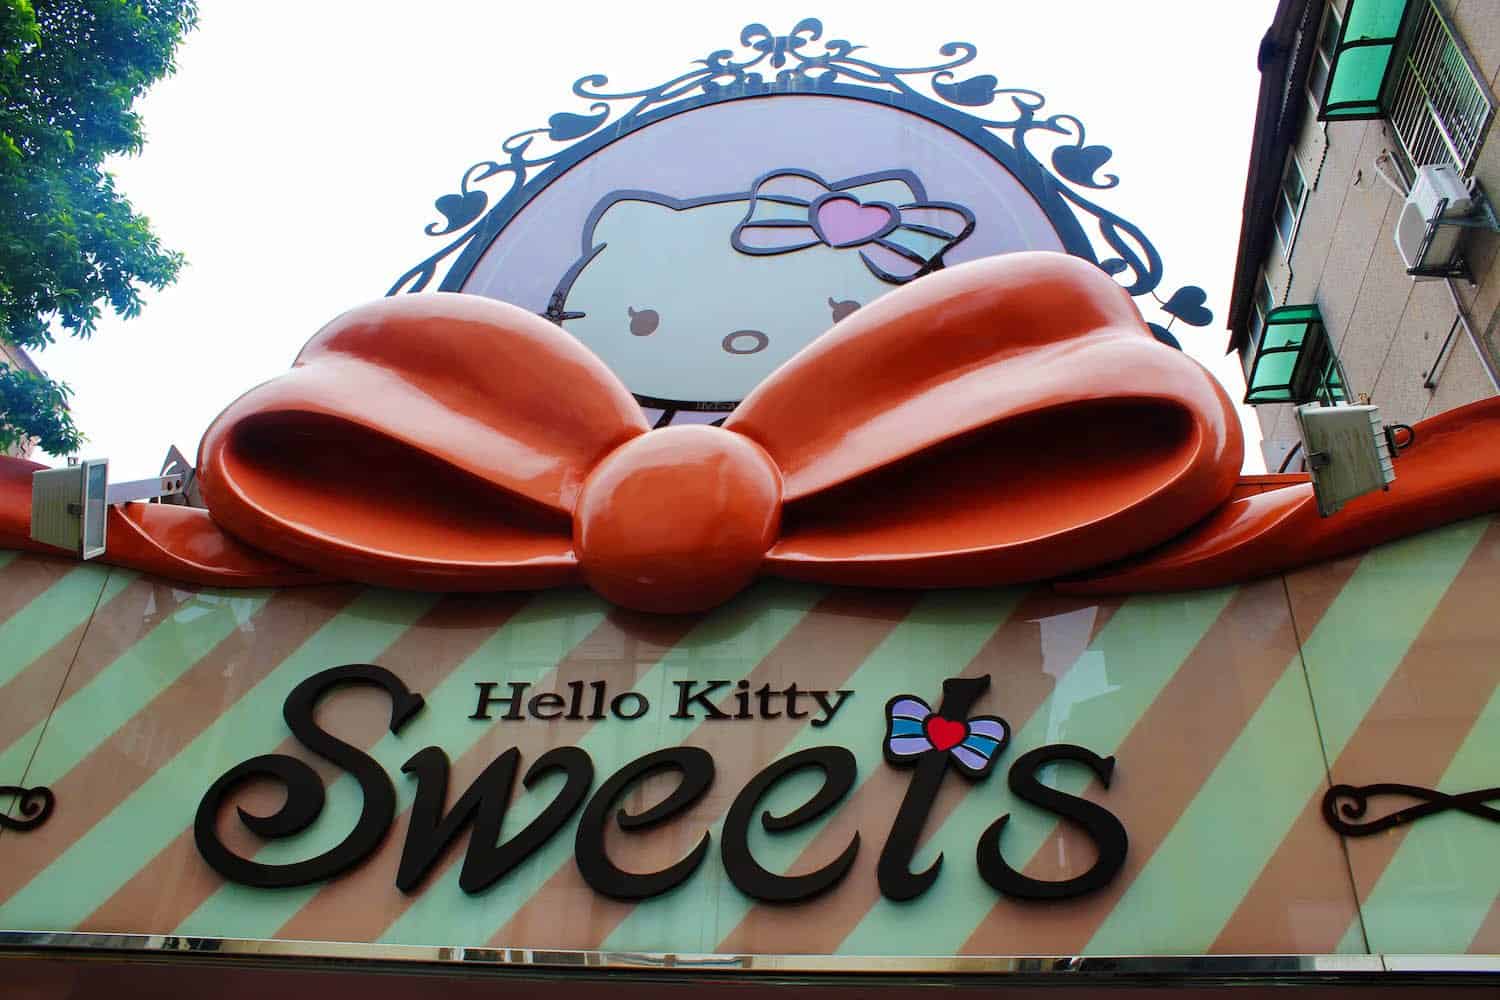 Hello Kitty Sweets in Taipei storefront